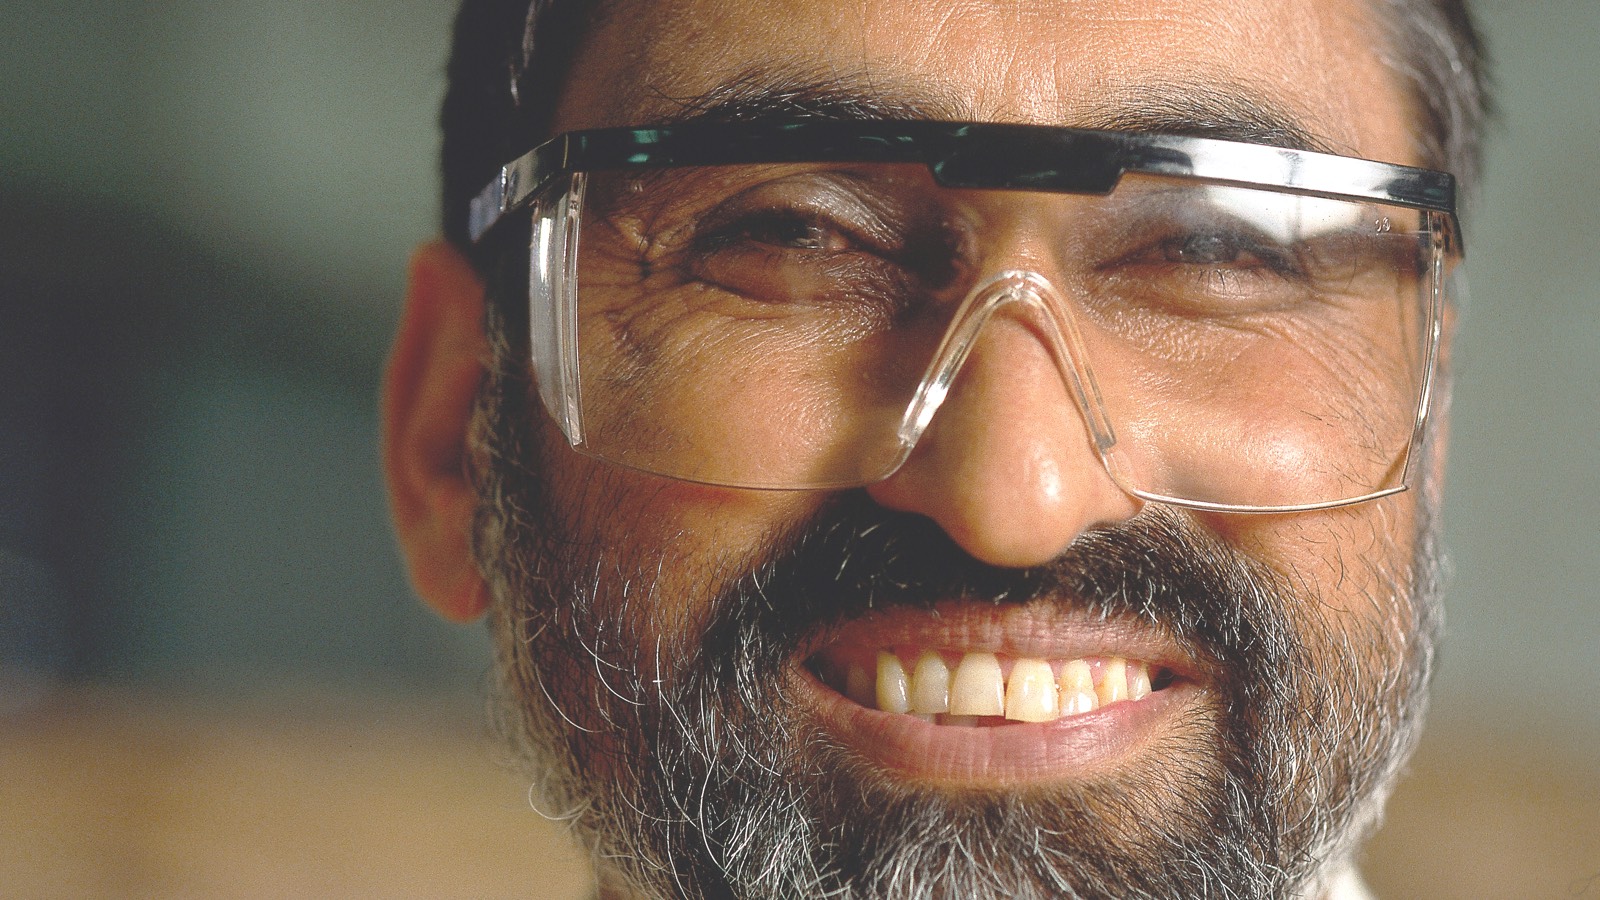 A bearded man wearing safety glasses stands in a factory and smiles.